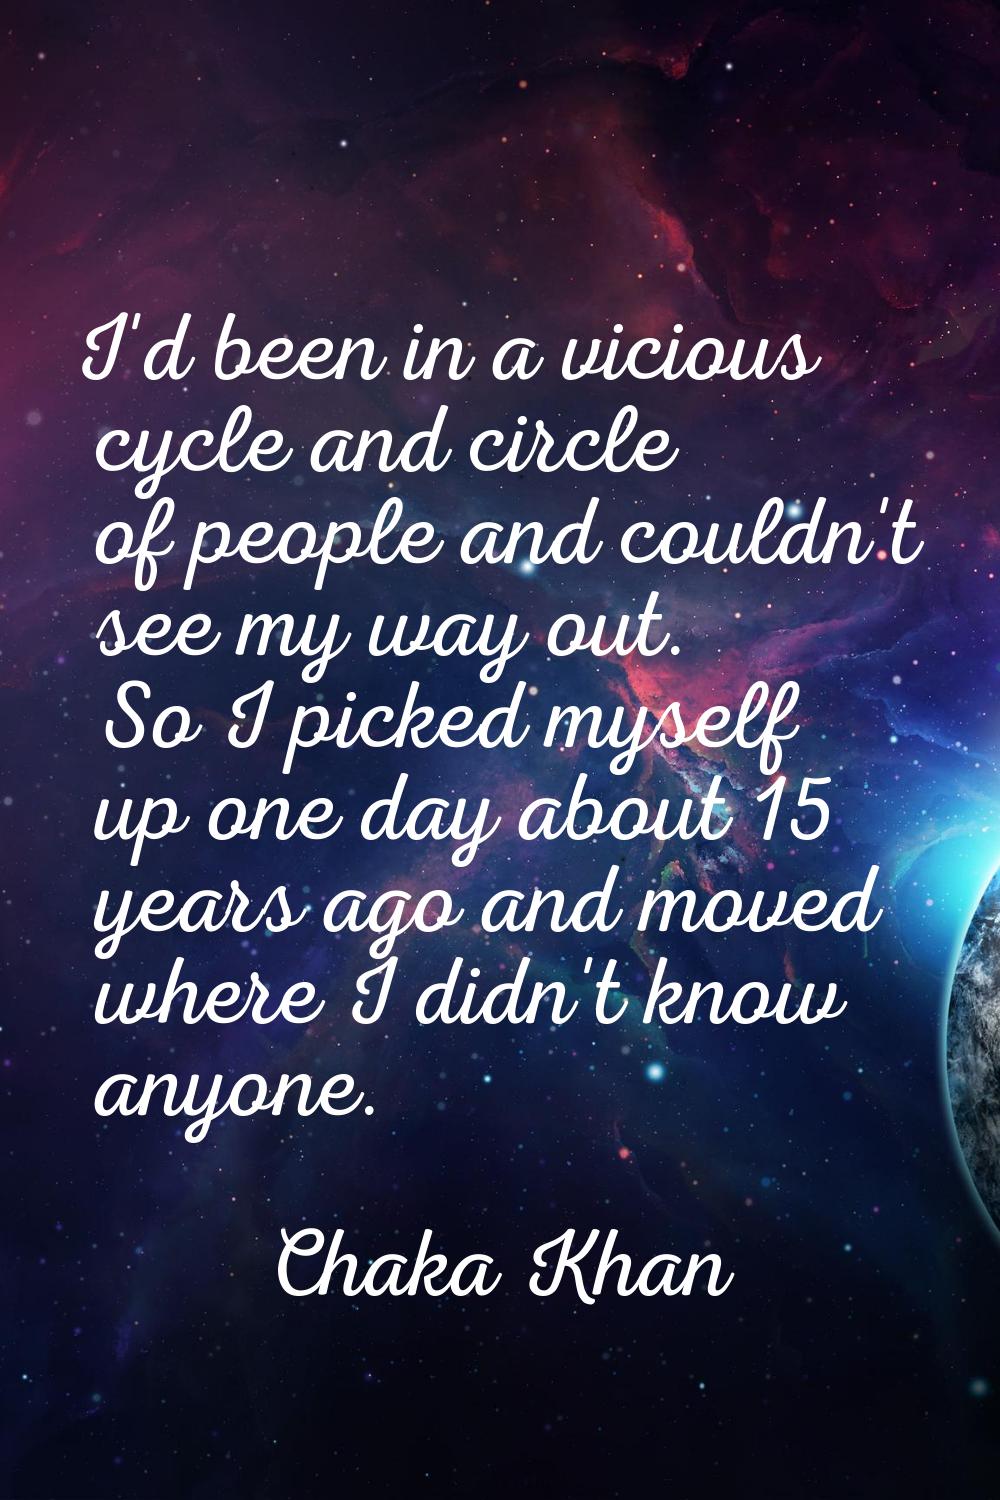 I'd been in a vicious cycle and circle of people and couldn't see my way out. So I picked myself up